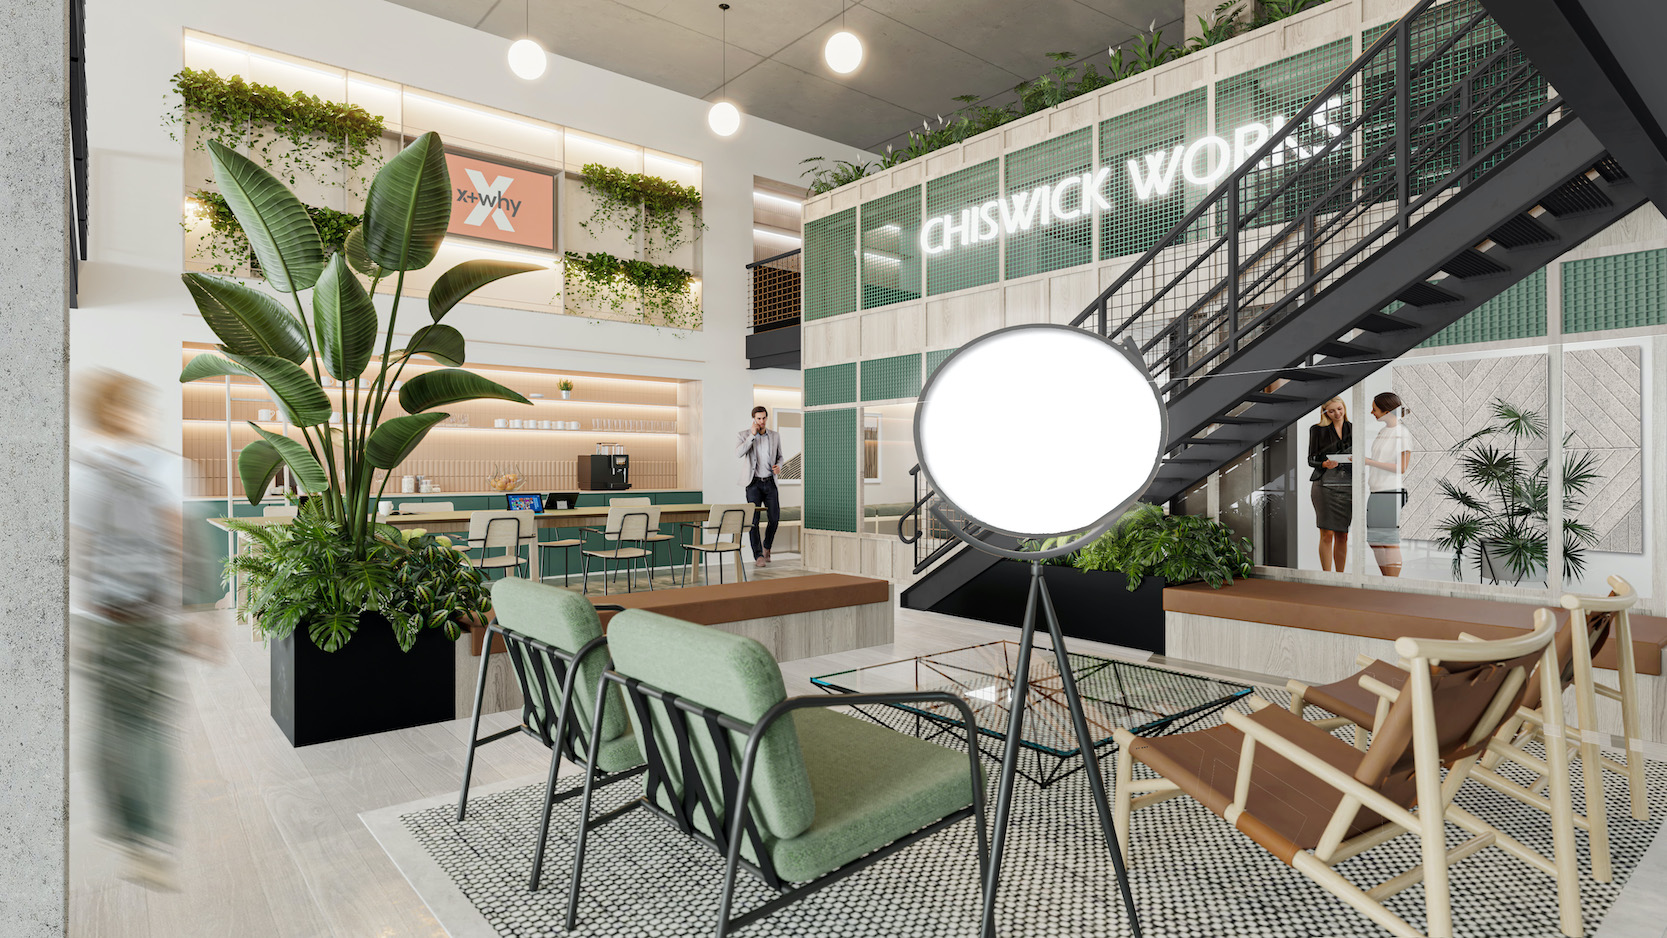 x+why Opens its First Suburban Office Hub for Home Workers